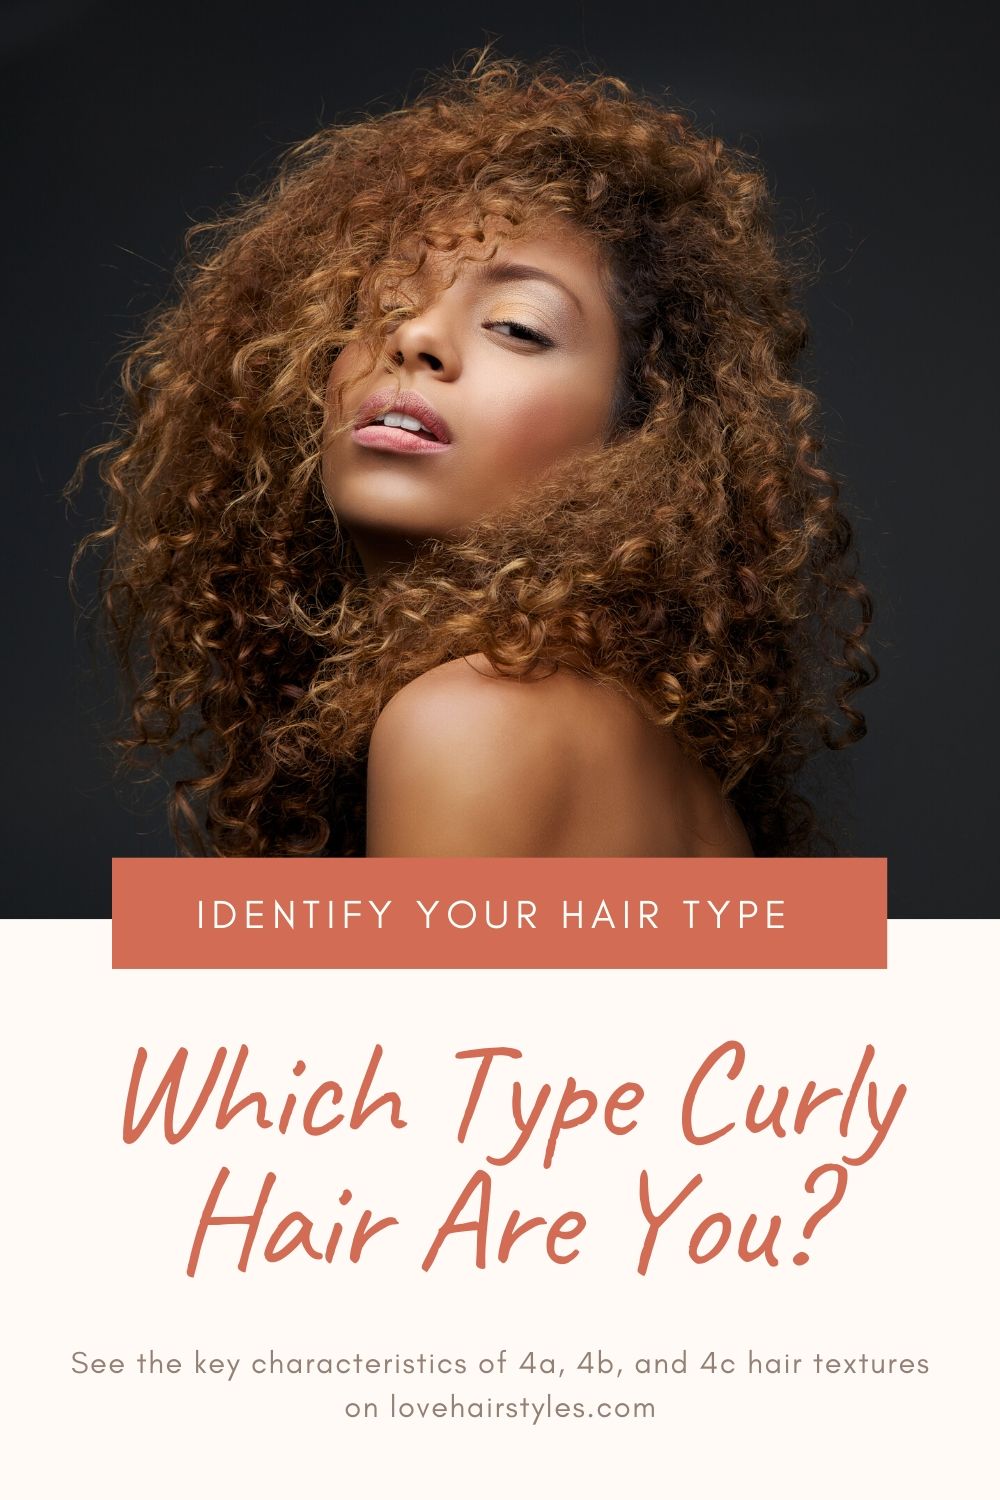 Which Type 4 Curly Hair Are You?